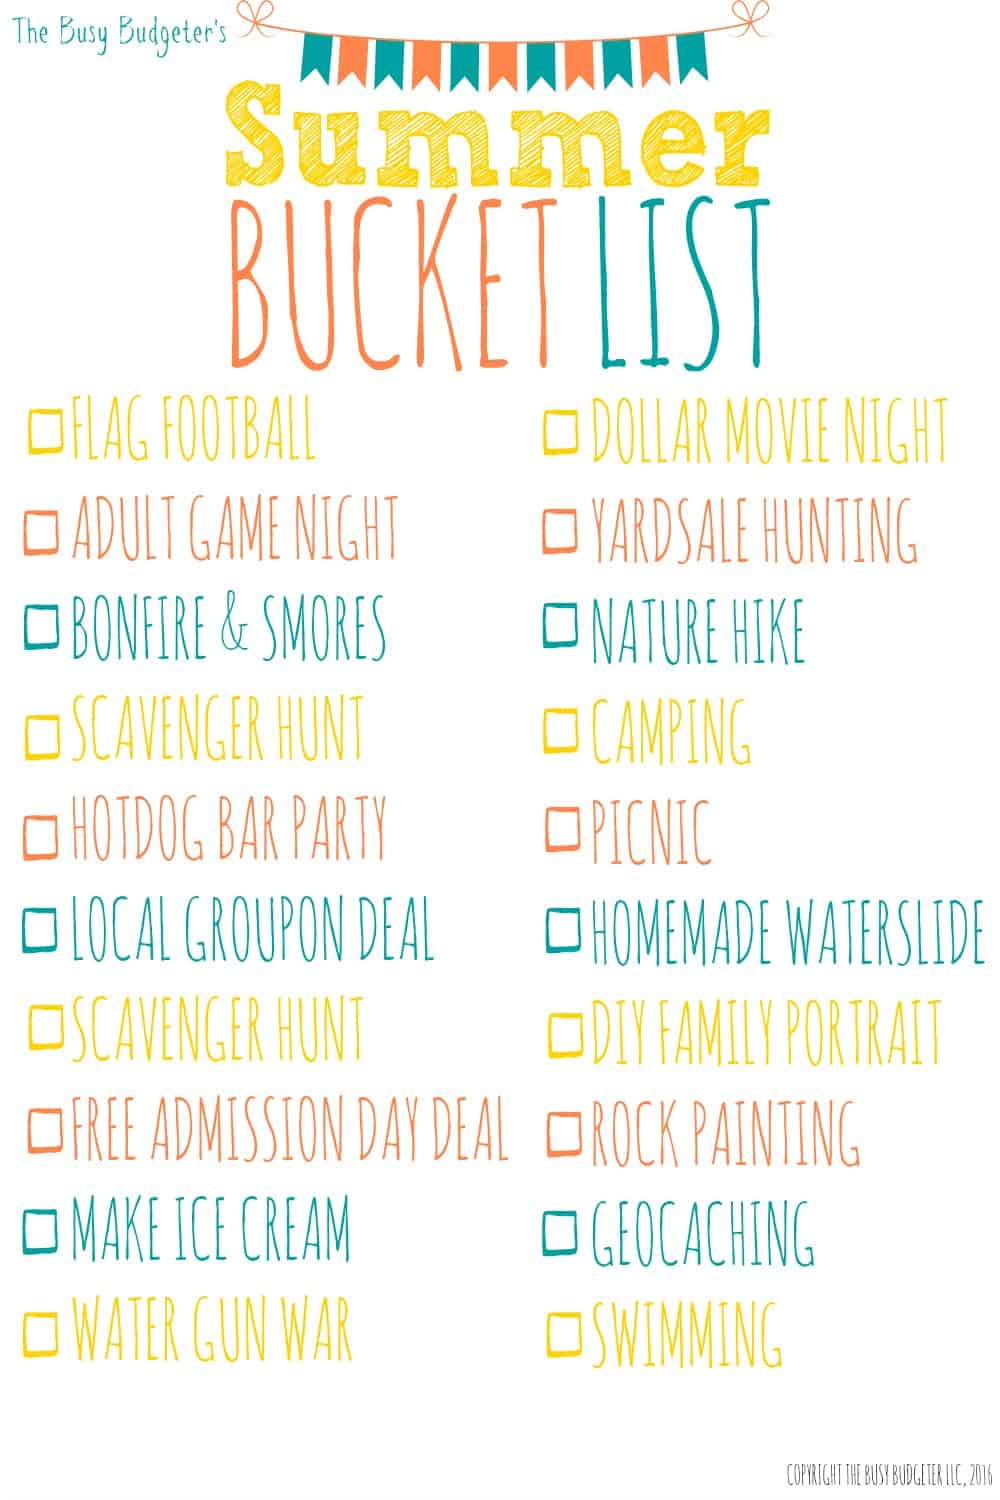 Cheap and Unique Summer Bucket List. GREAT FIND! So psyched about this! We're paying off debt ($20k gone int he last year alone!) and were looking for fun things to do as a family this summer since we cancelled our (expensive!) summer vacation. This summer bucket list is perfect. Mounted in on our command center and we're ready to roll! Bring on SUMMER!